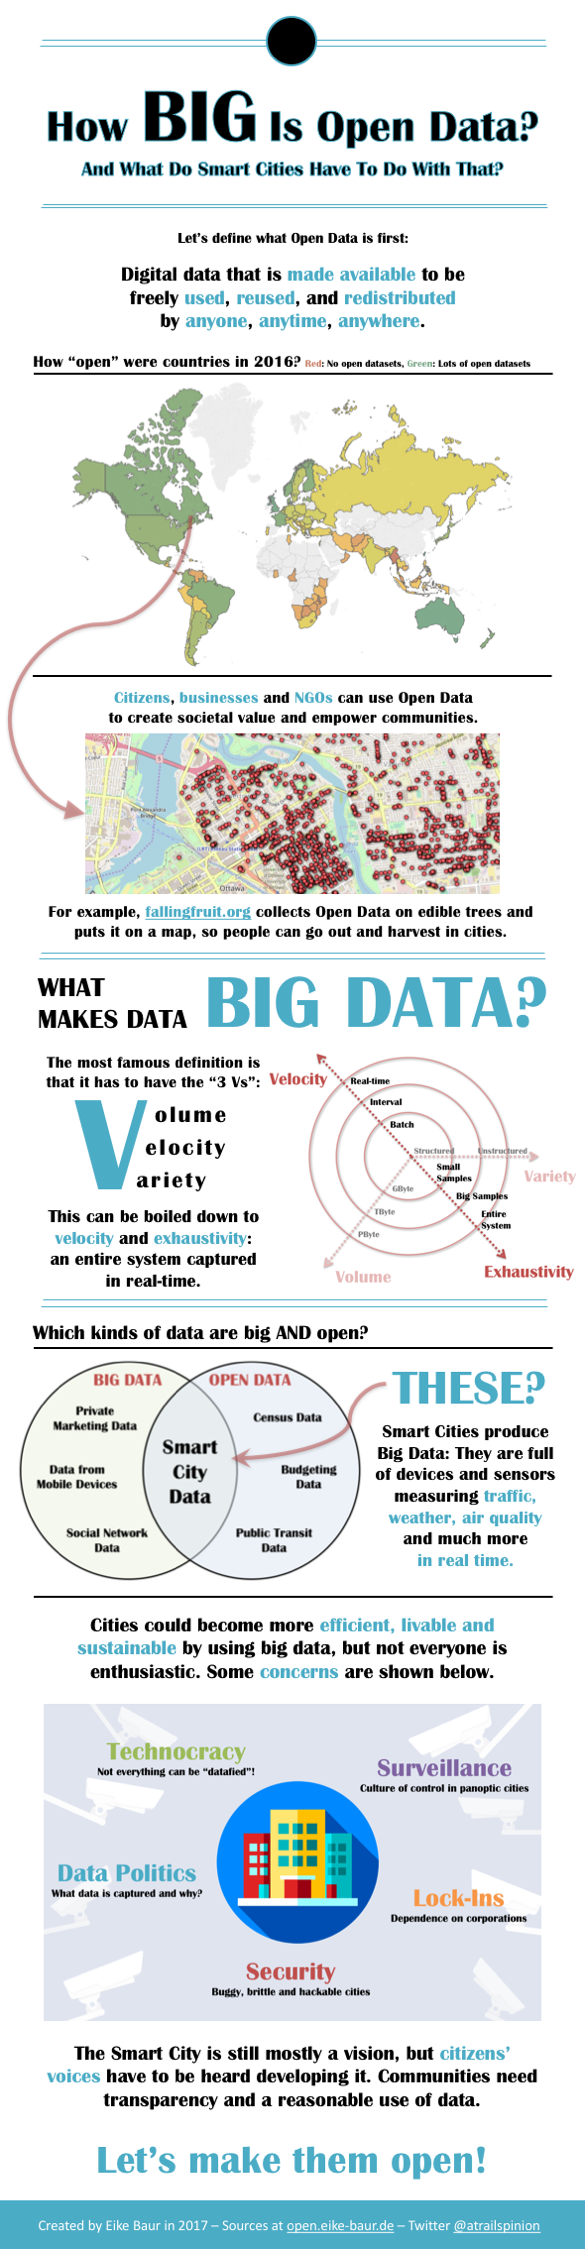 Infographic on how "big" open data is